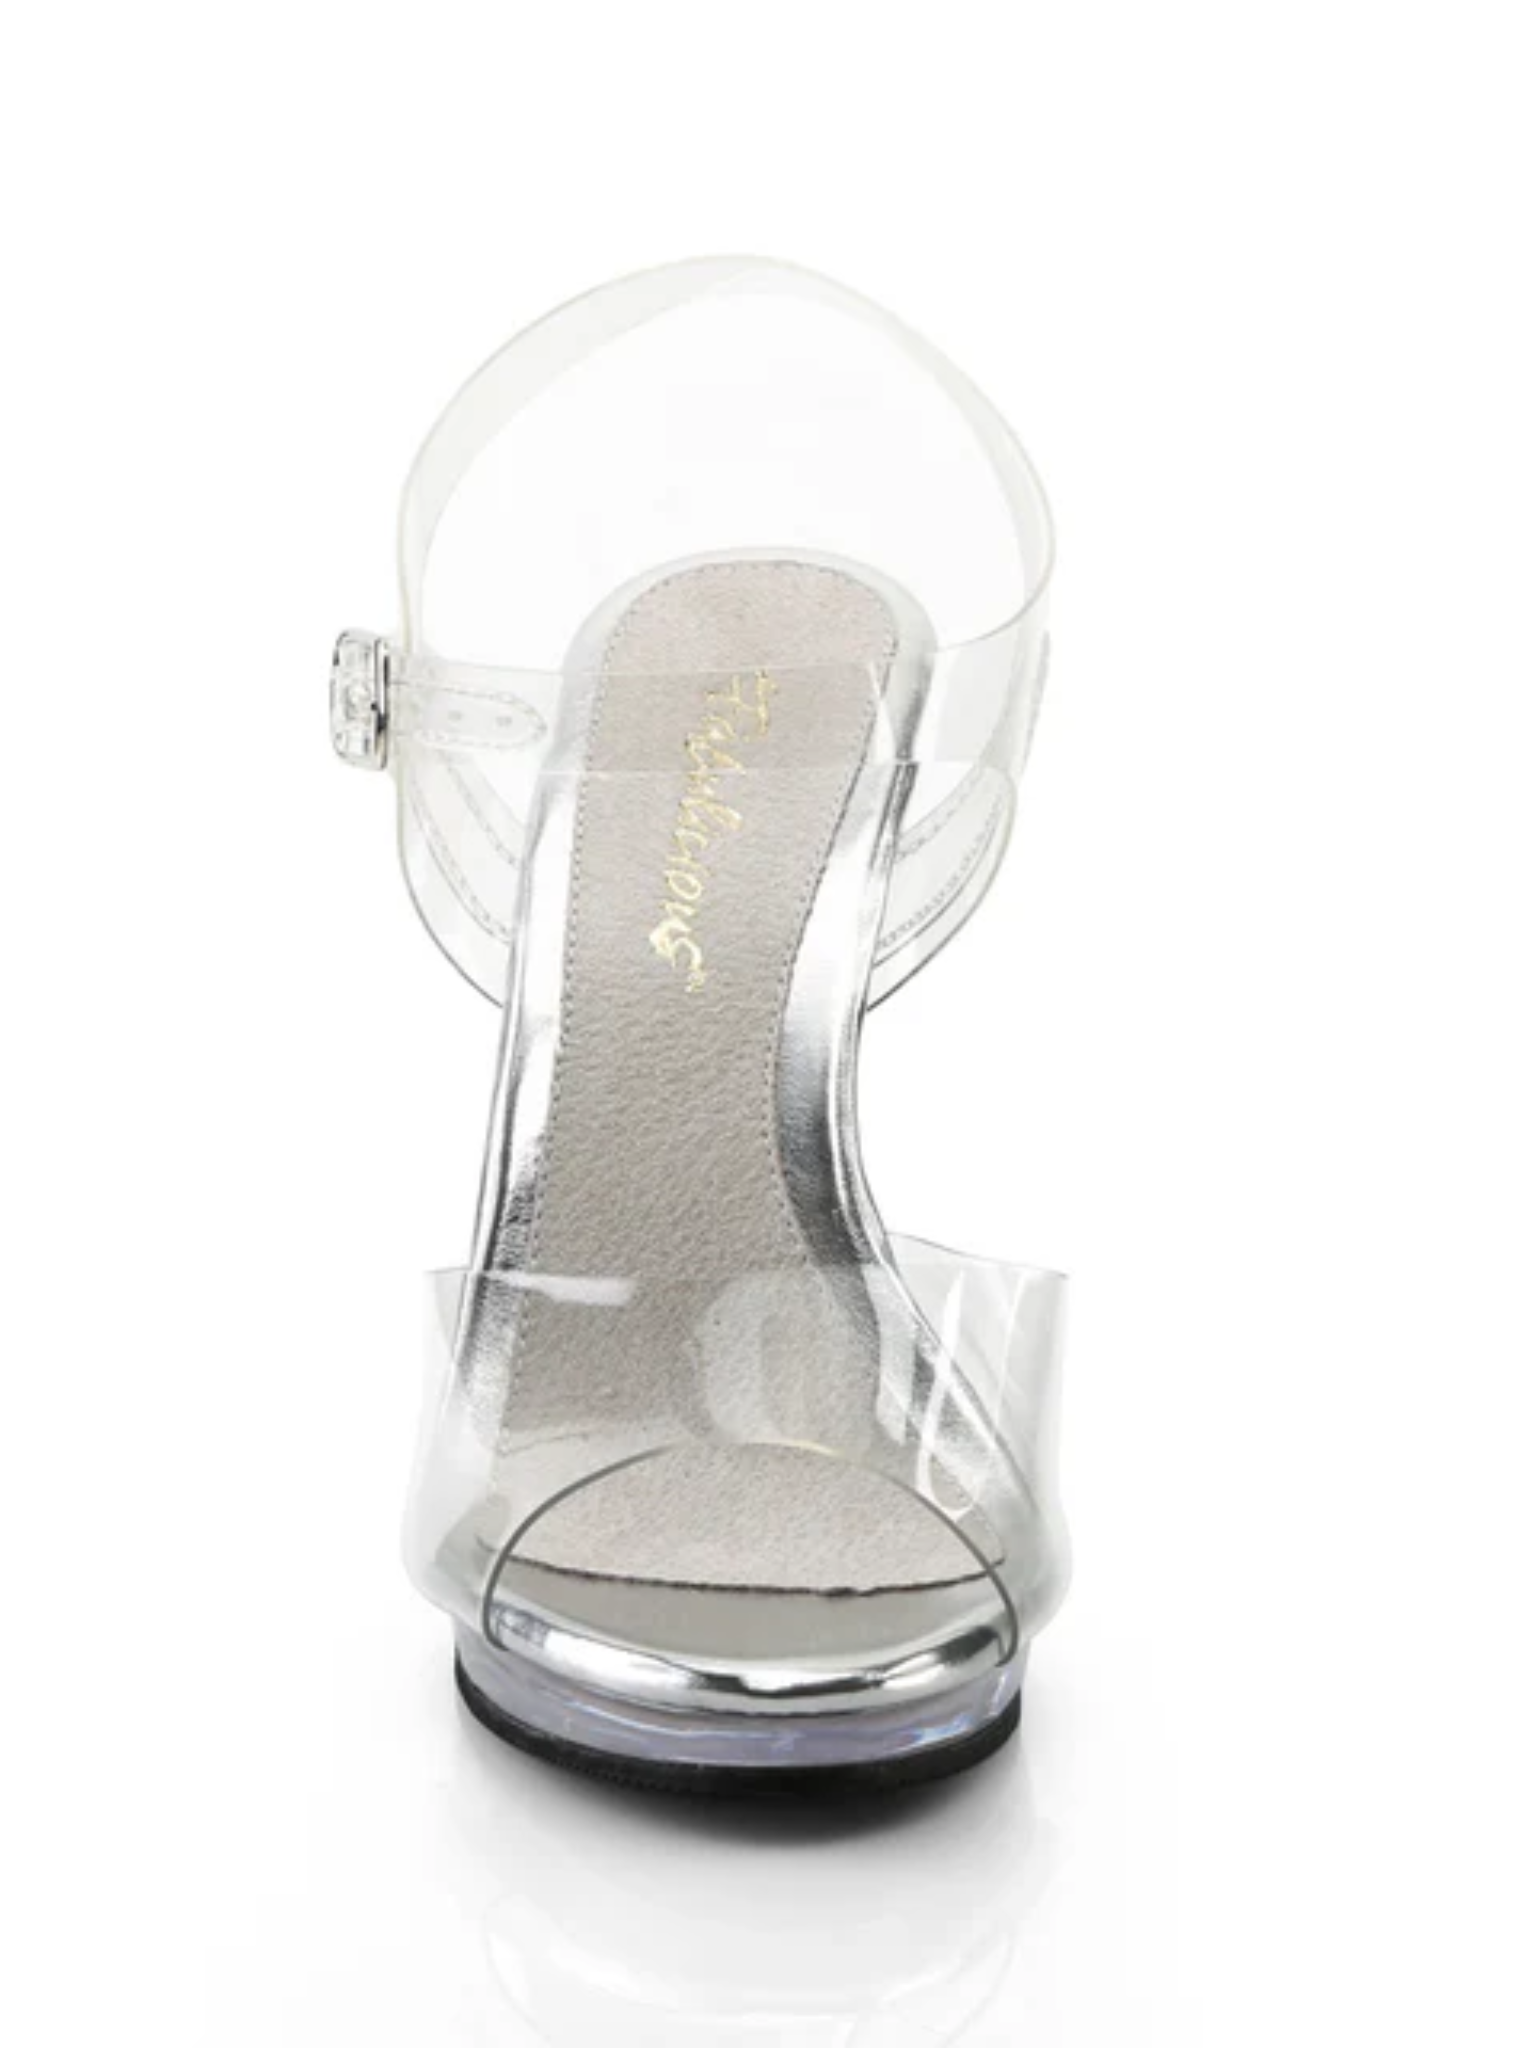 men's clear high heel shoe white background front view XDress